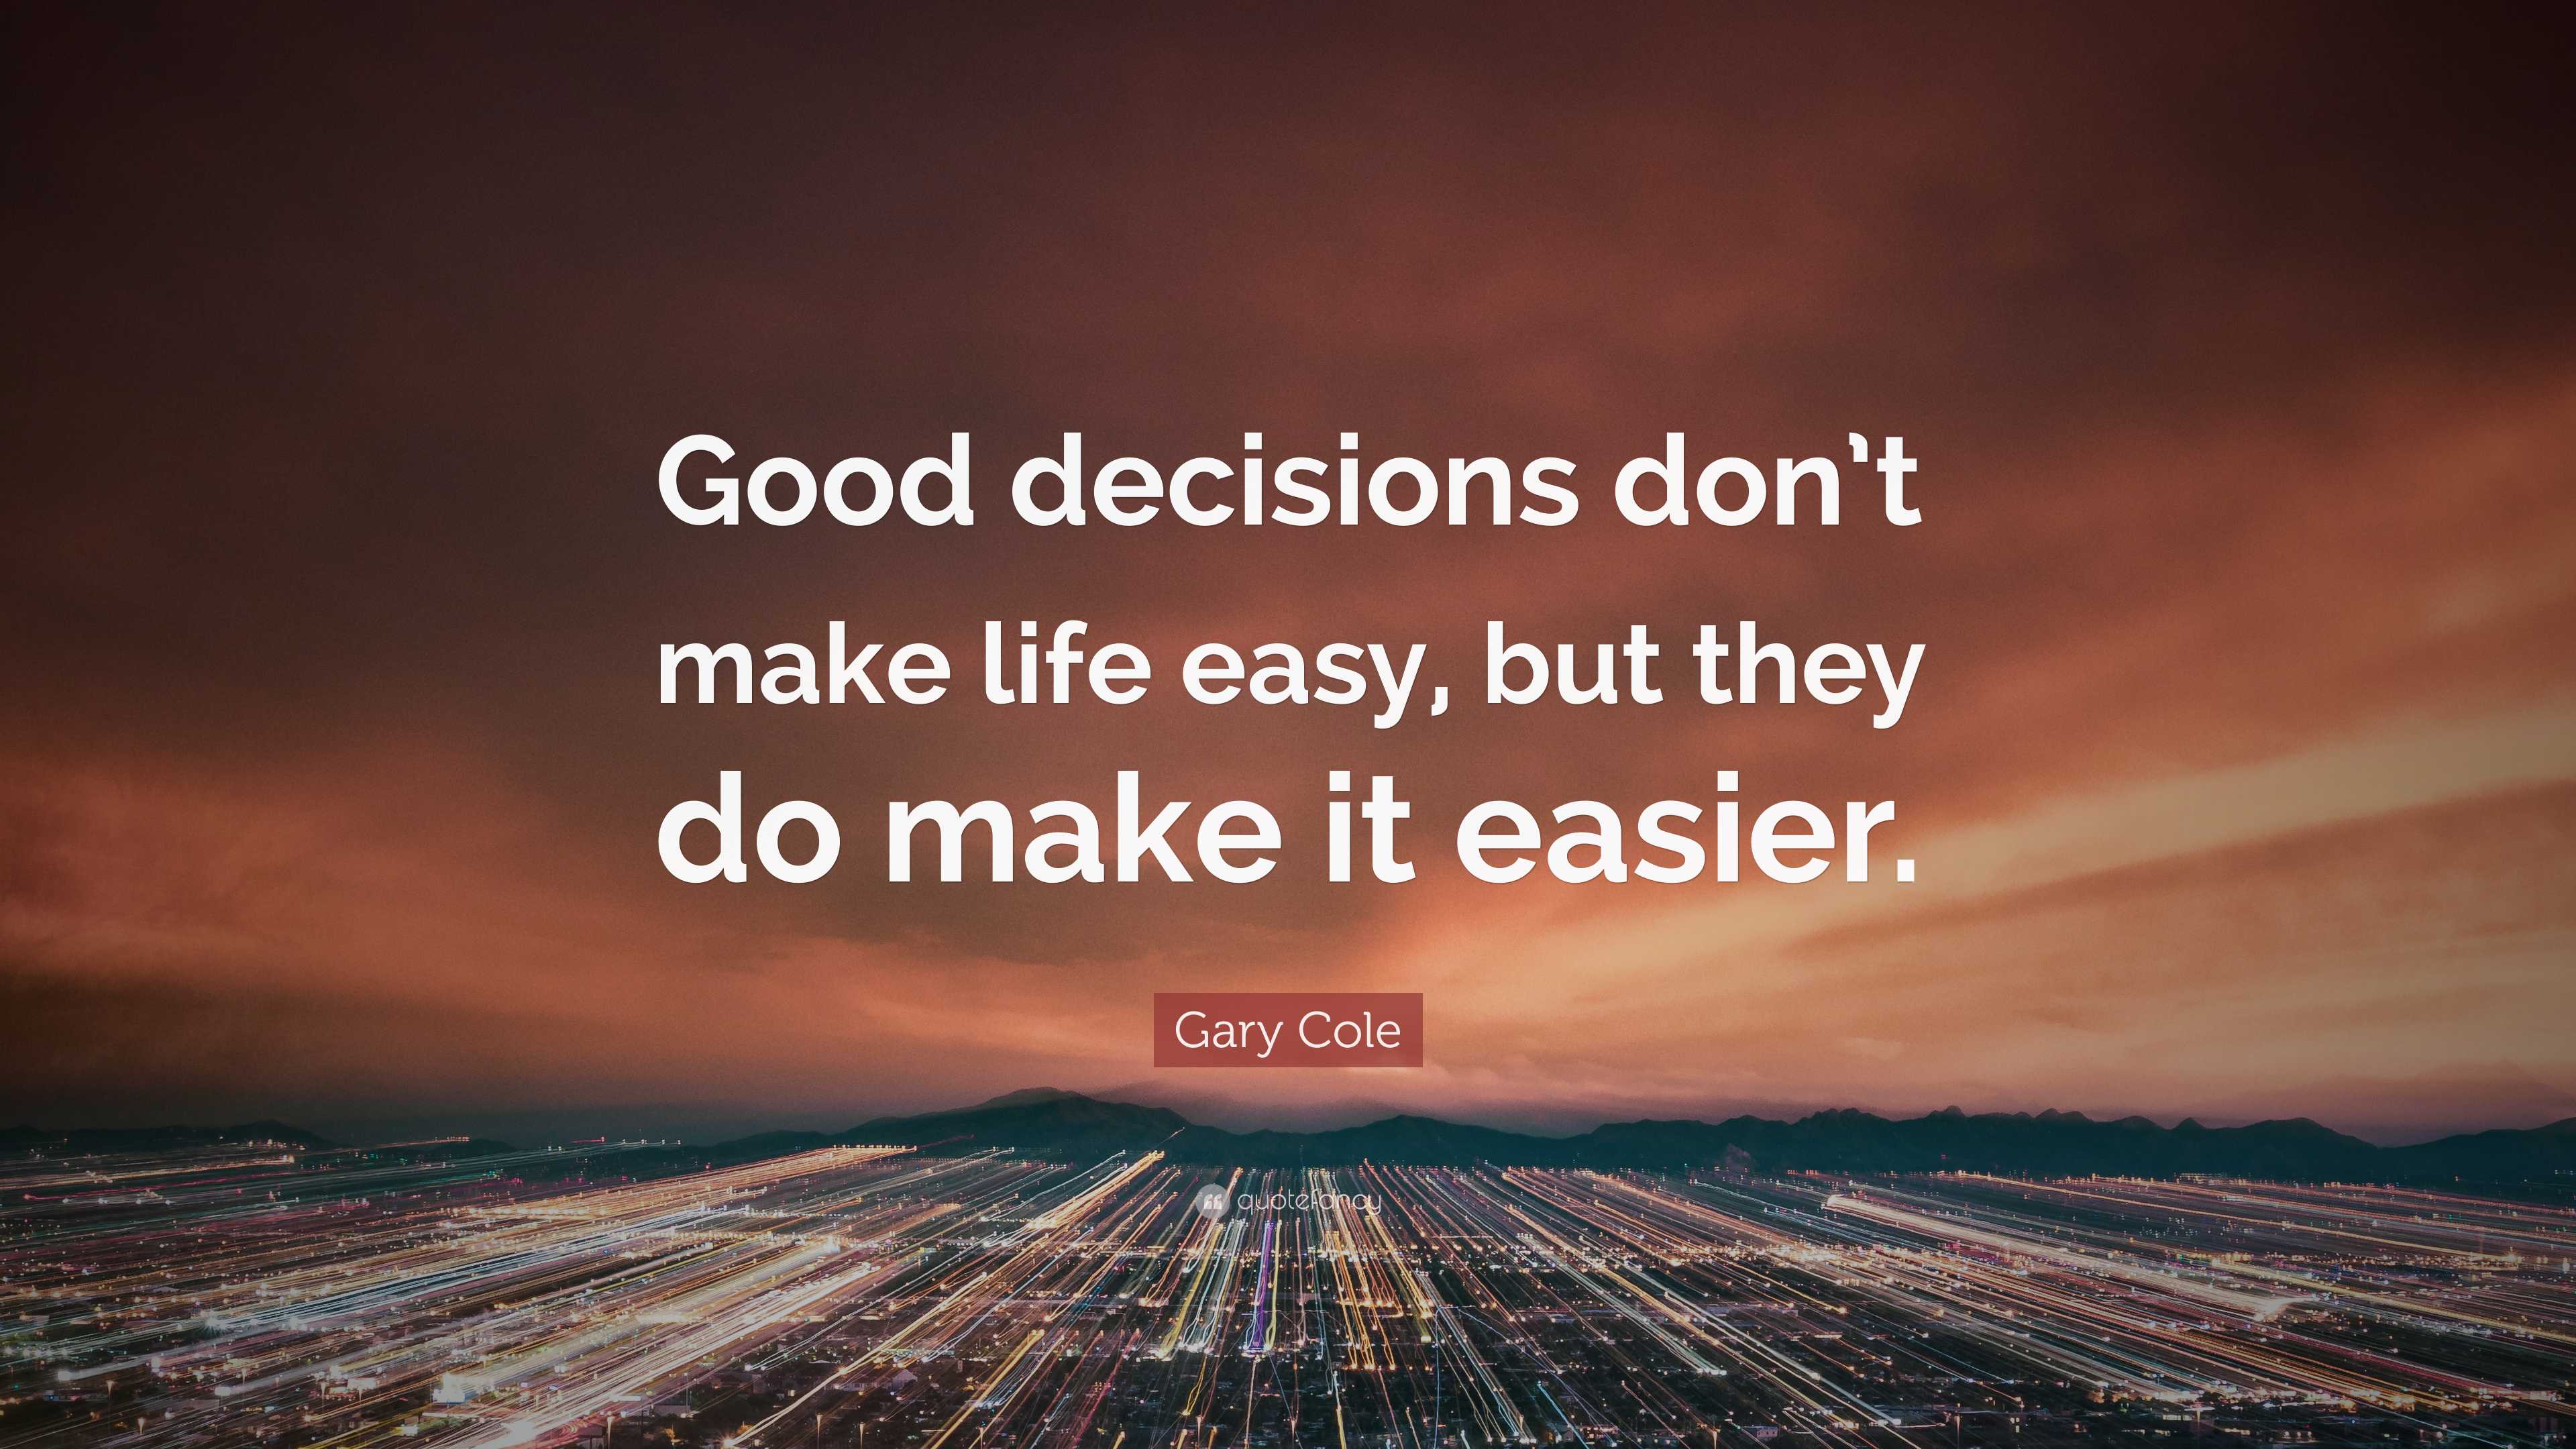 https://quotefancy.com/media/wallpaper/3840x2160/7985401-Gary-Cole-Quote-Good-decisions-don-t-make-life-easy-but-they-do.jpg